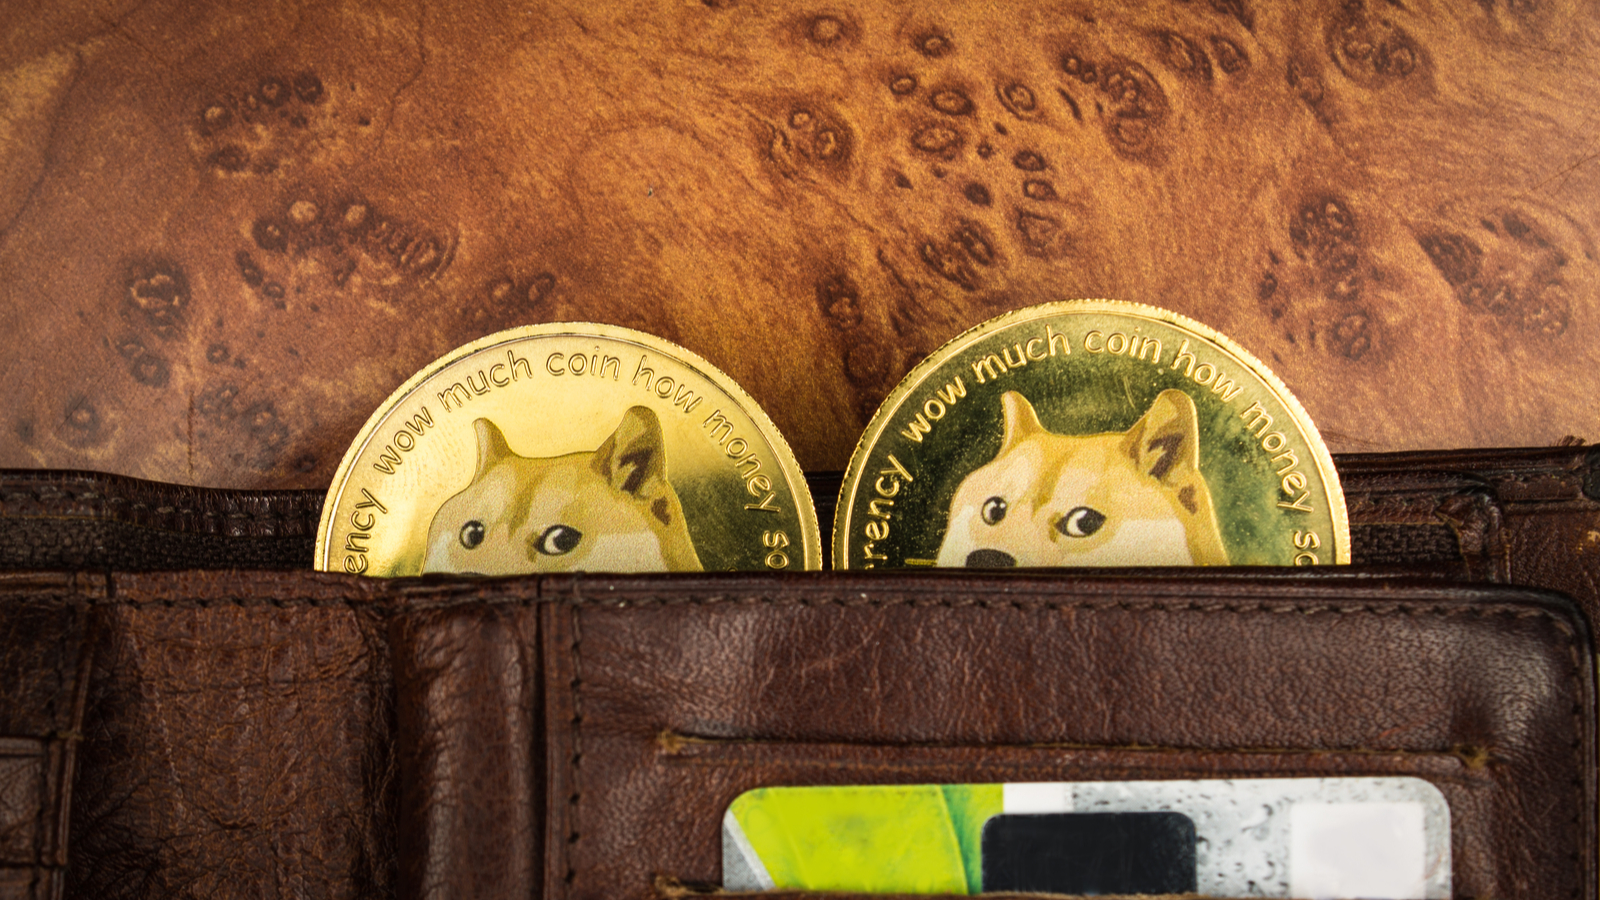 Dogecoin Price Predictions with doge faces peeking out of brown leather wallet. The coins have the words "wow much coin how money" embossed on them.